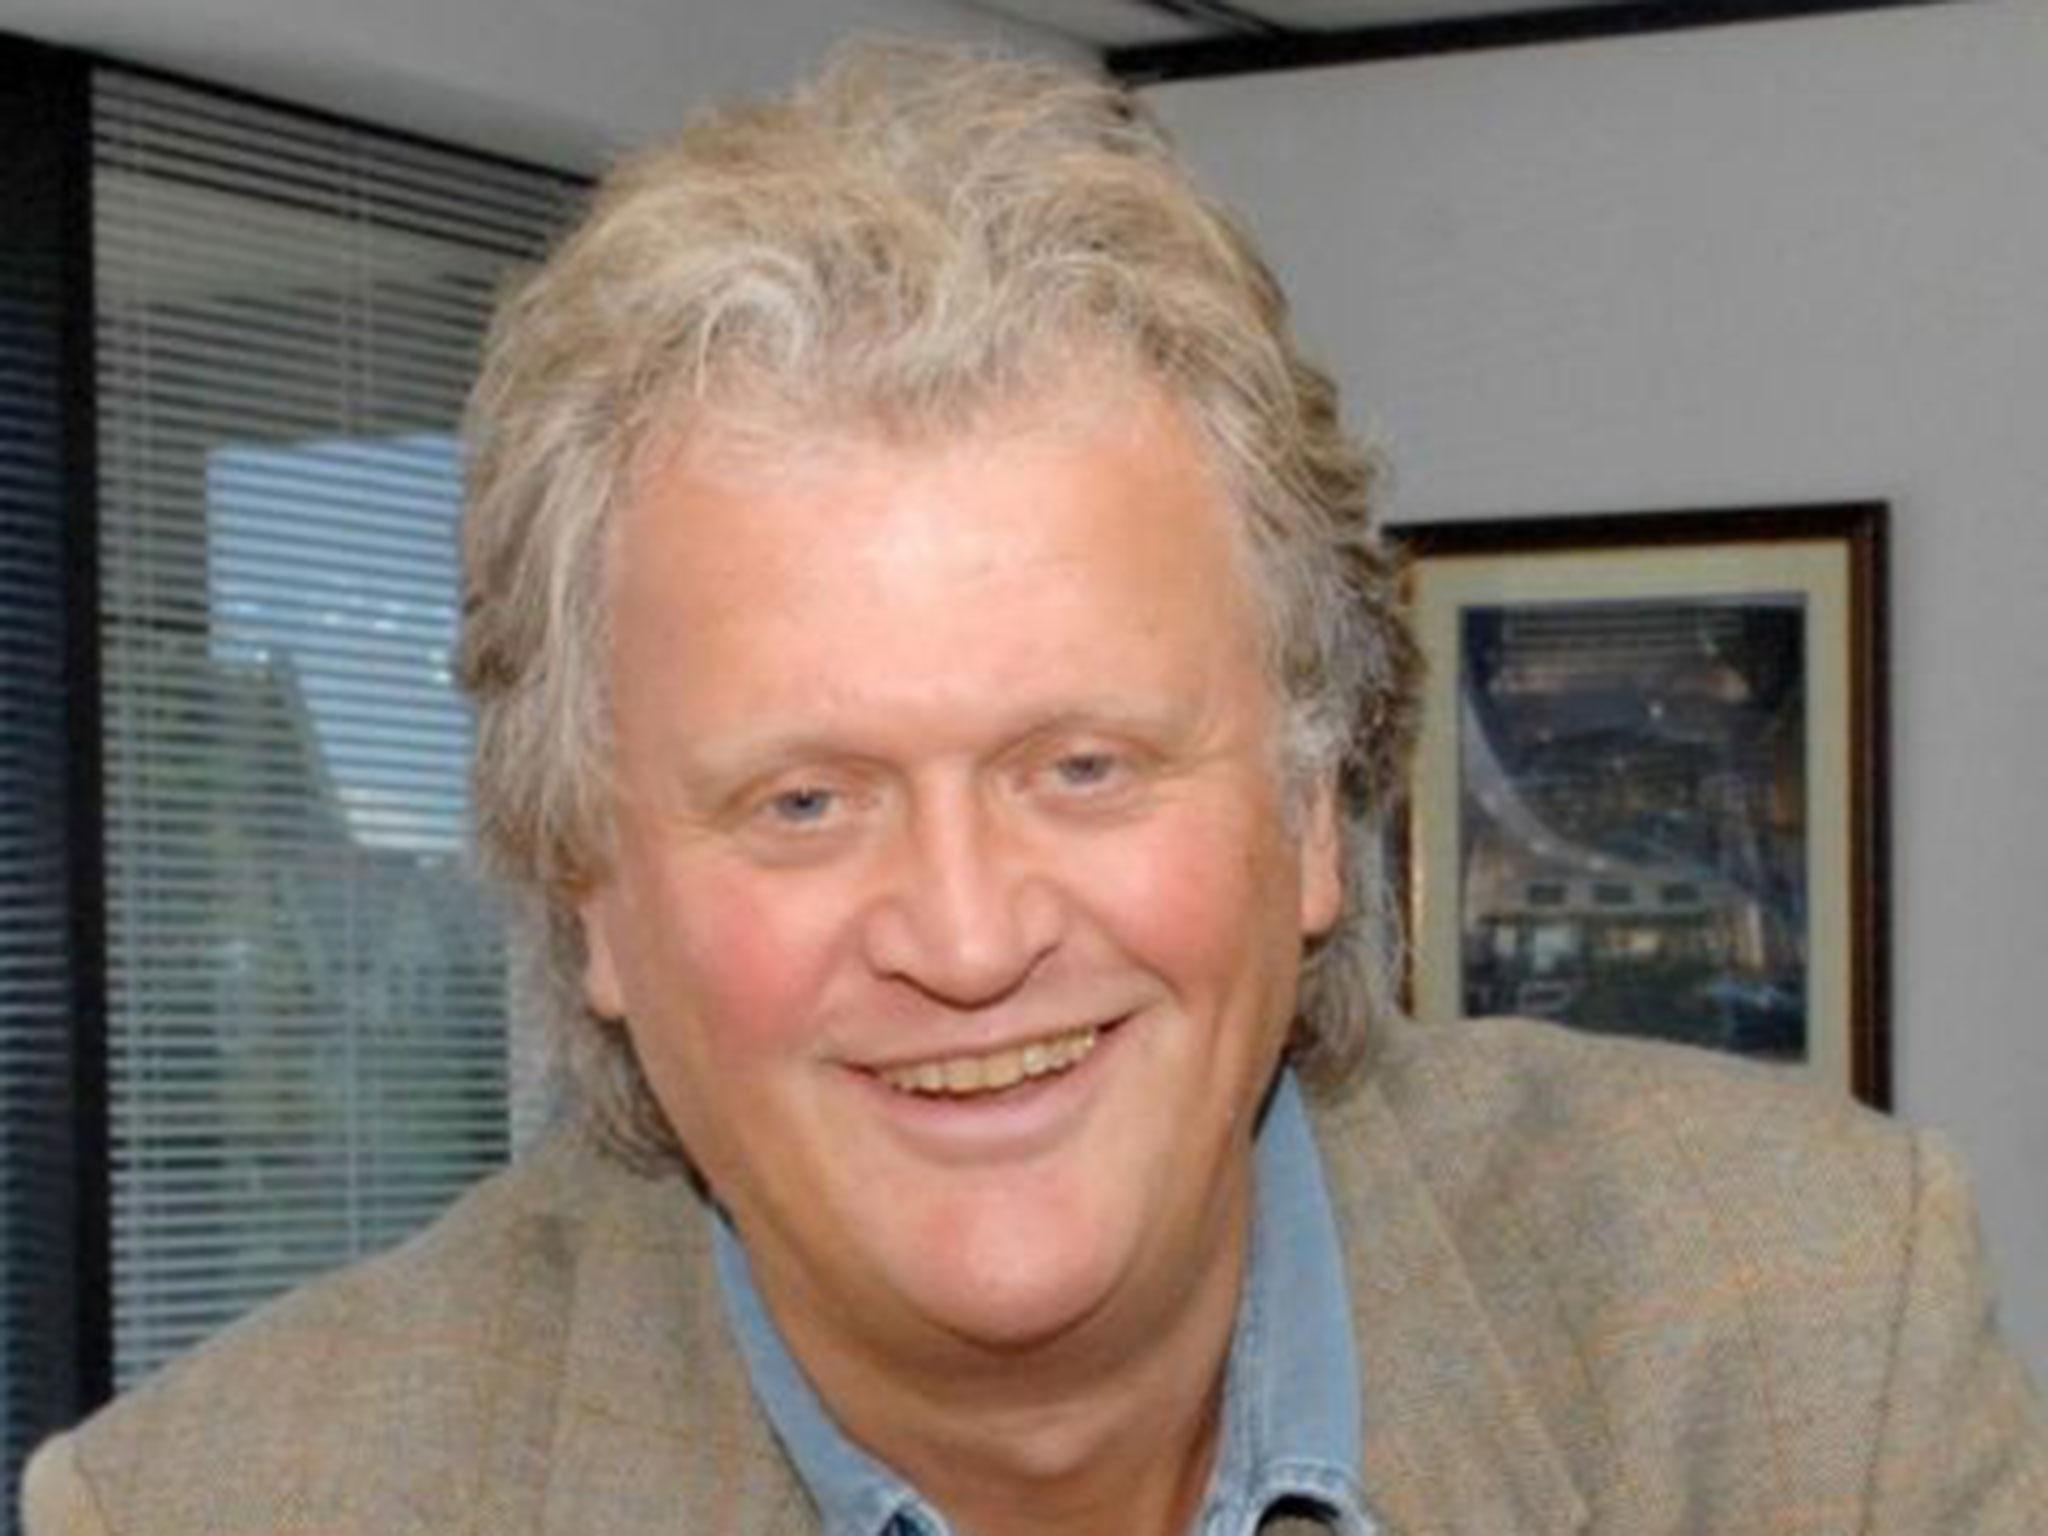 The Wetherspoons boss said the UK would receive a windfall if it sisn;t secure a free trade deal with the EU